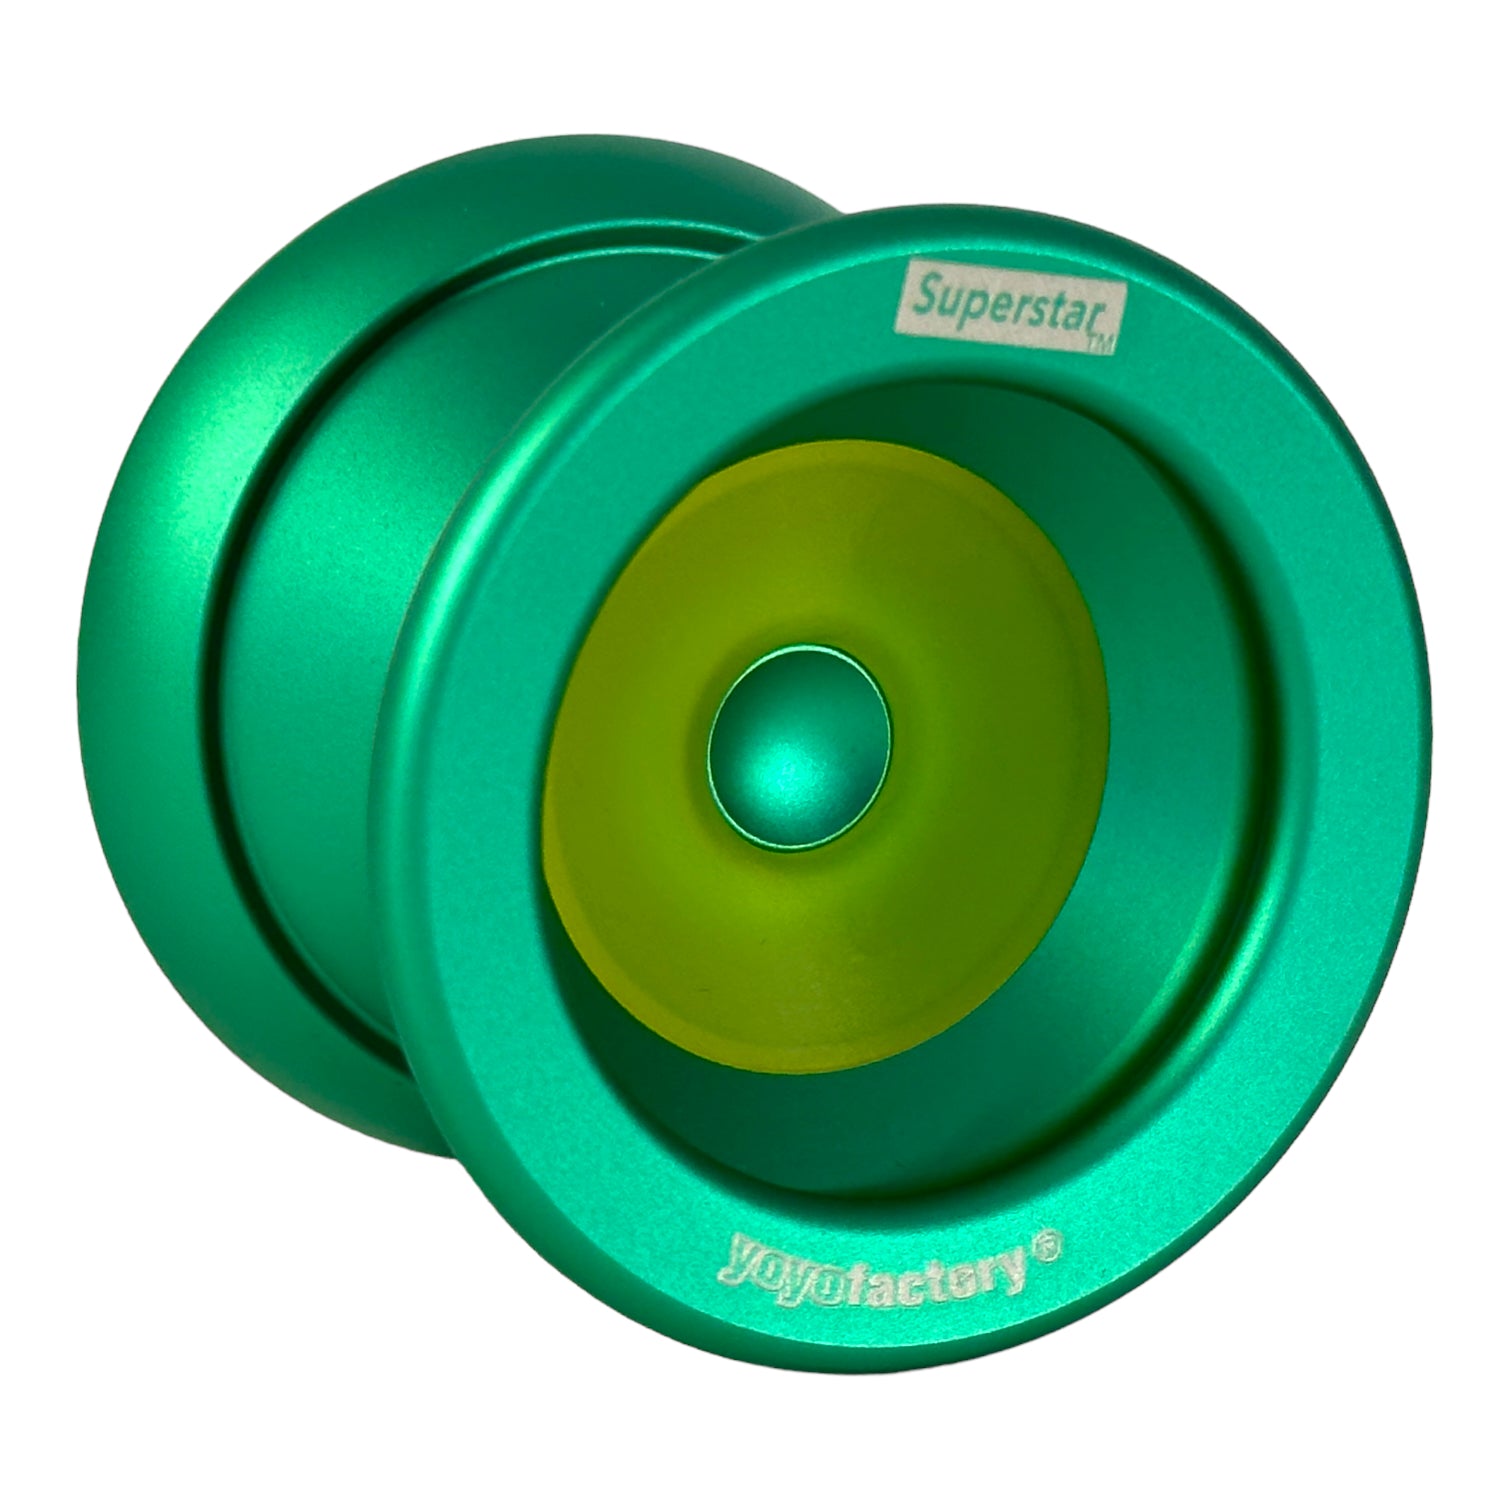 Superstar YoYo green with yellow cap side view